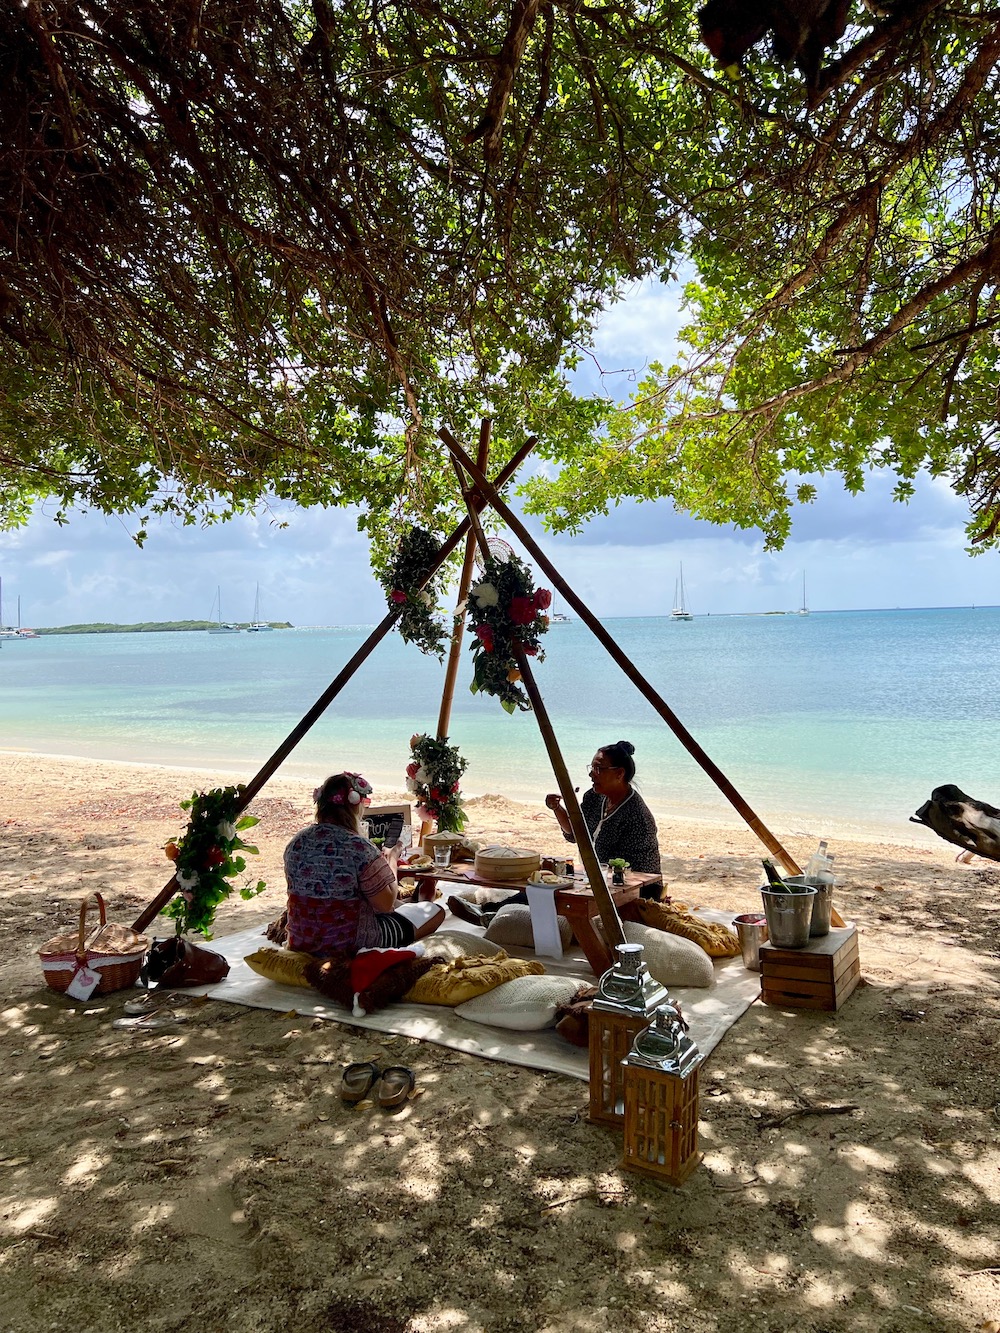 Picnic Aruba - One of the most romantic things to do in Aruba